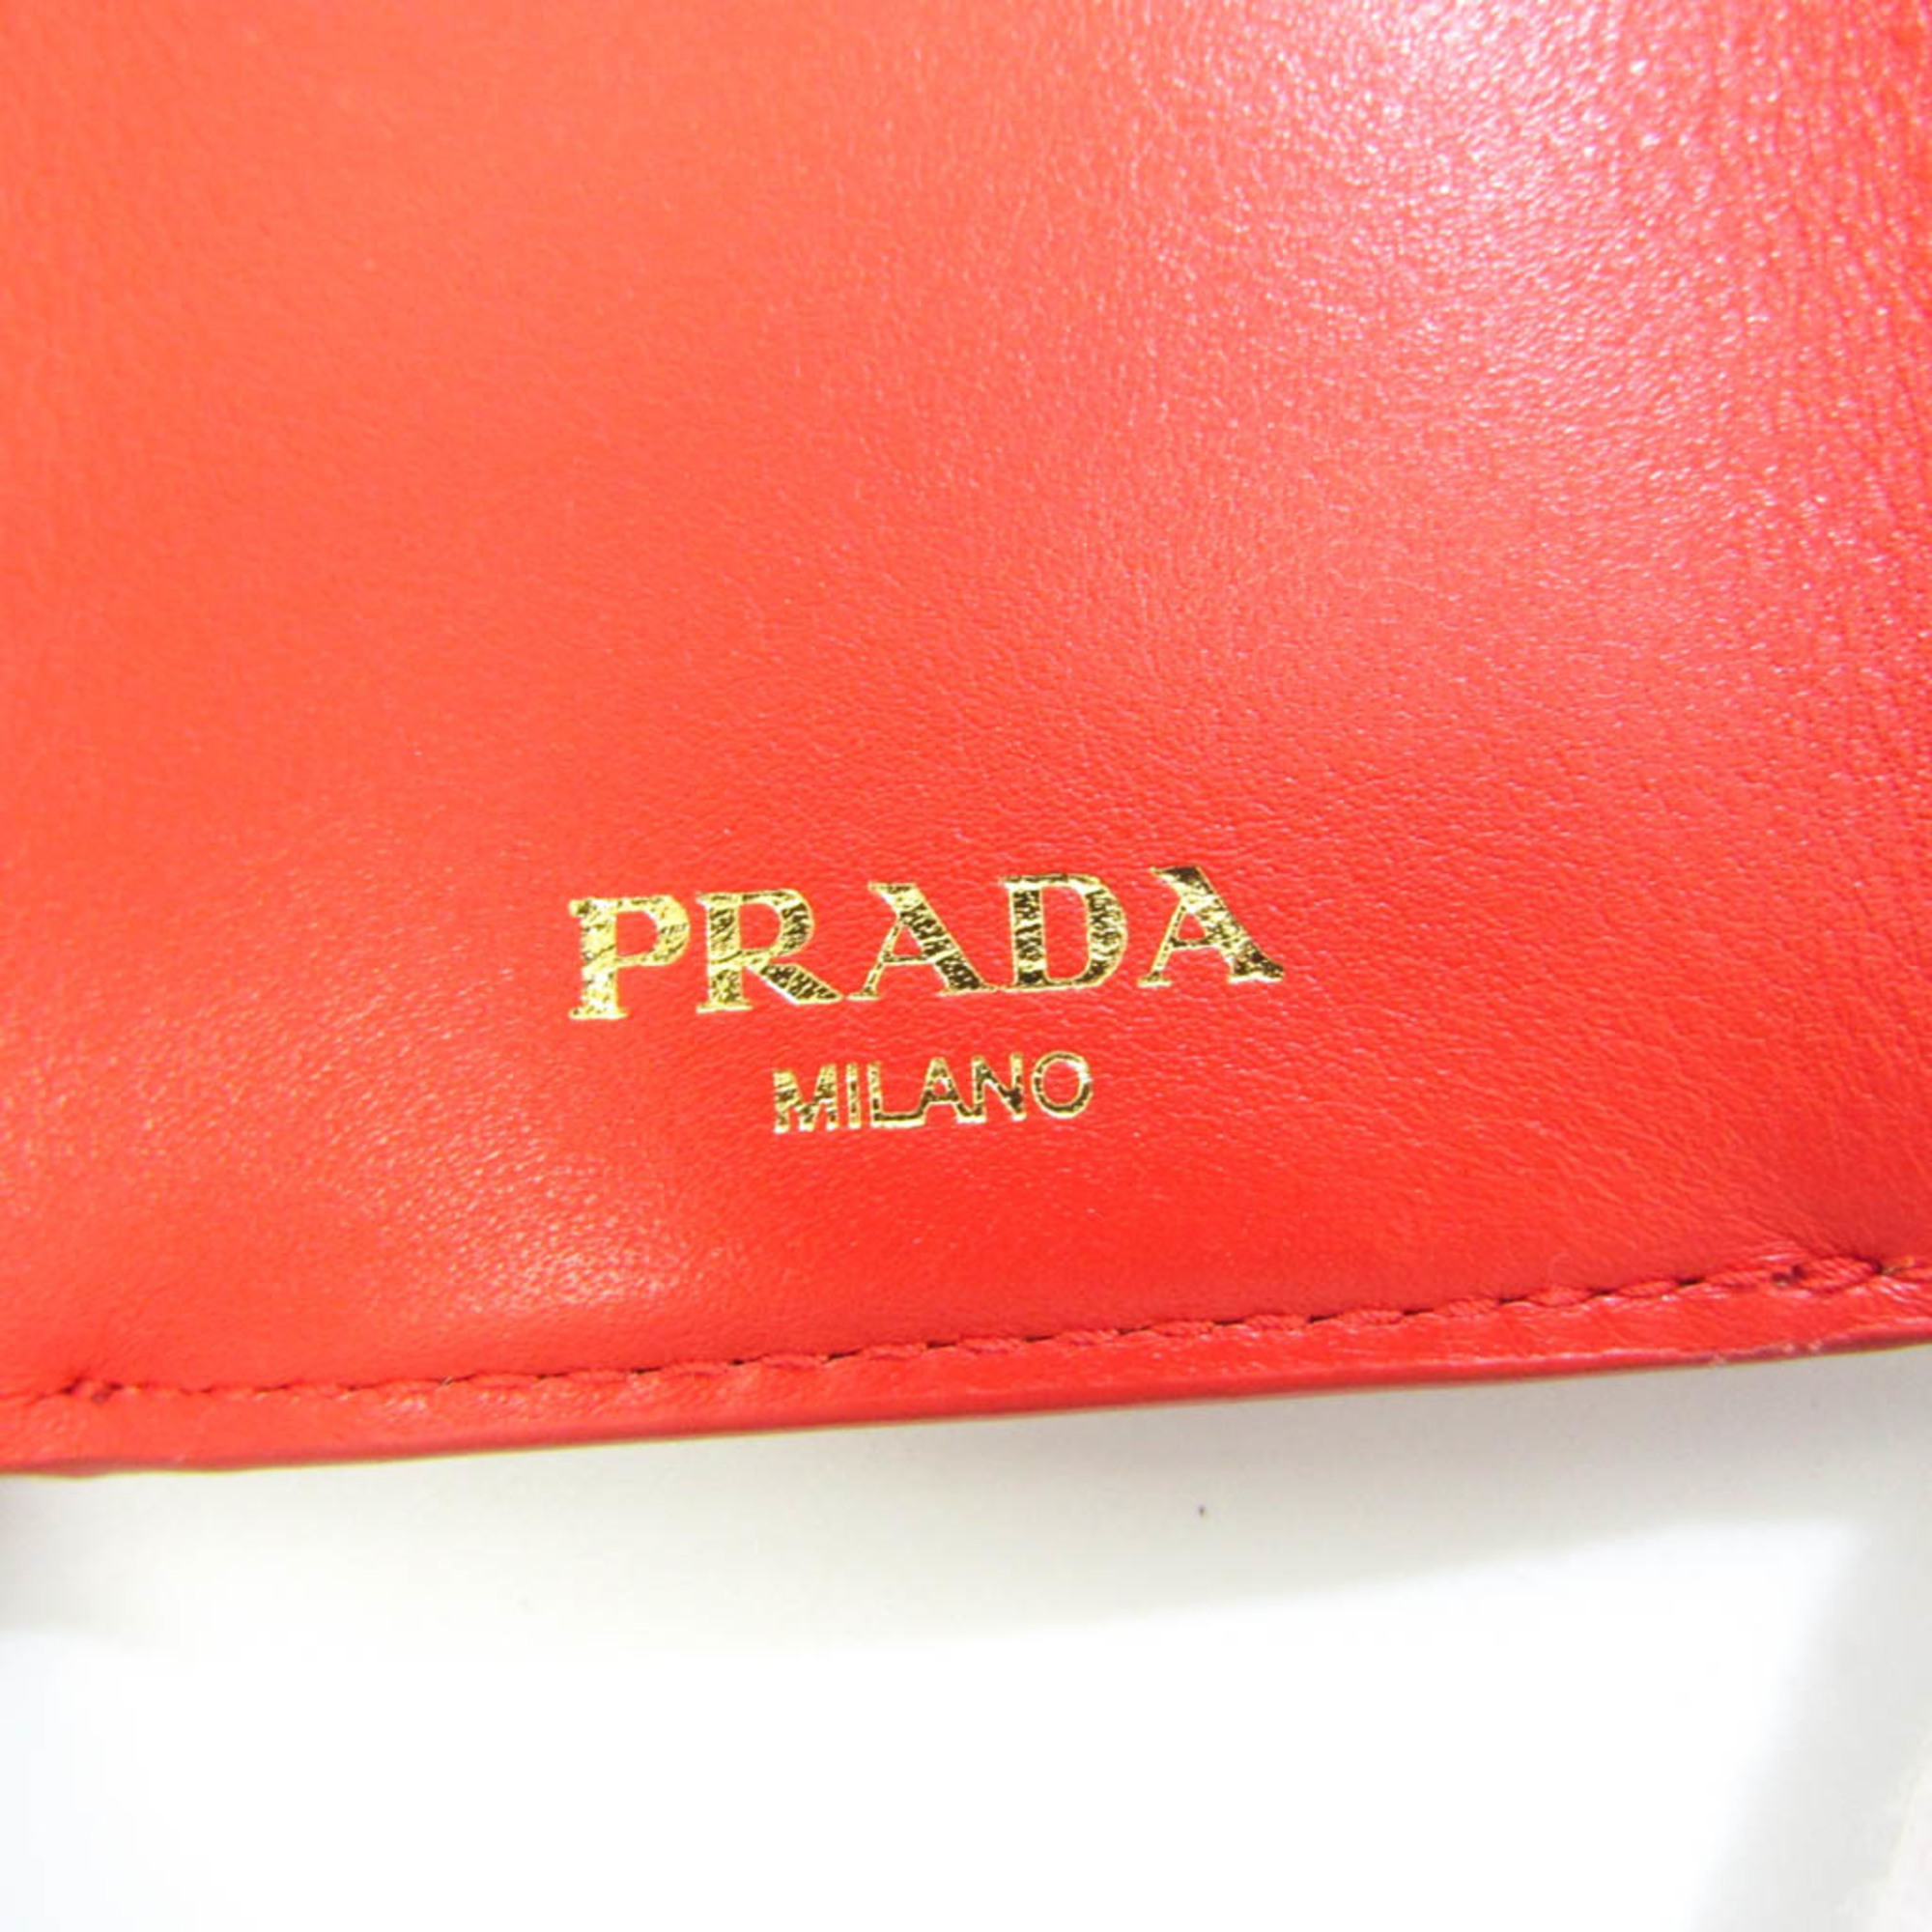 Prada 1MH021 Women's Leather Wallet (tri-fold) Red Color